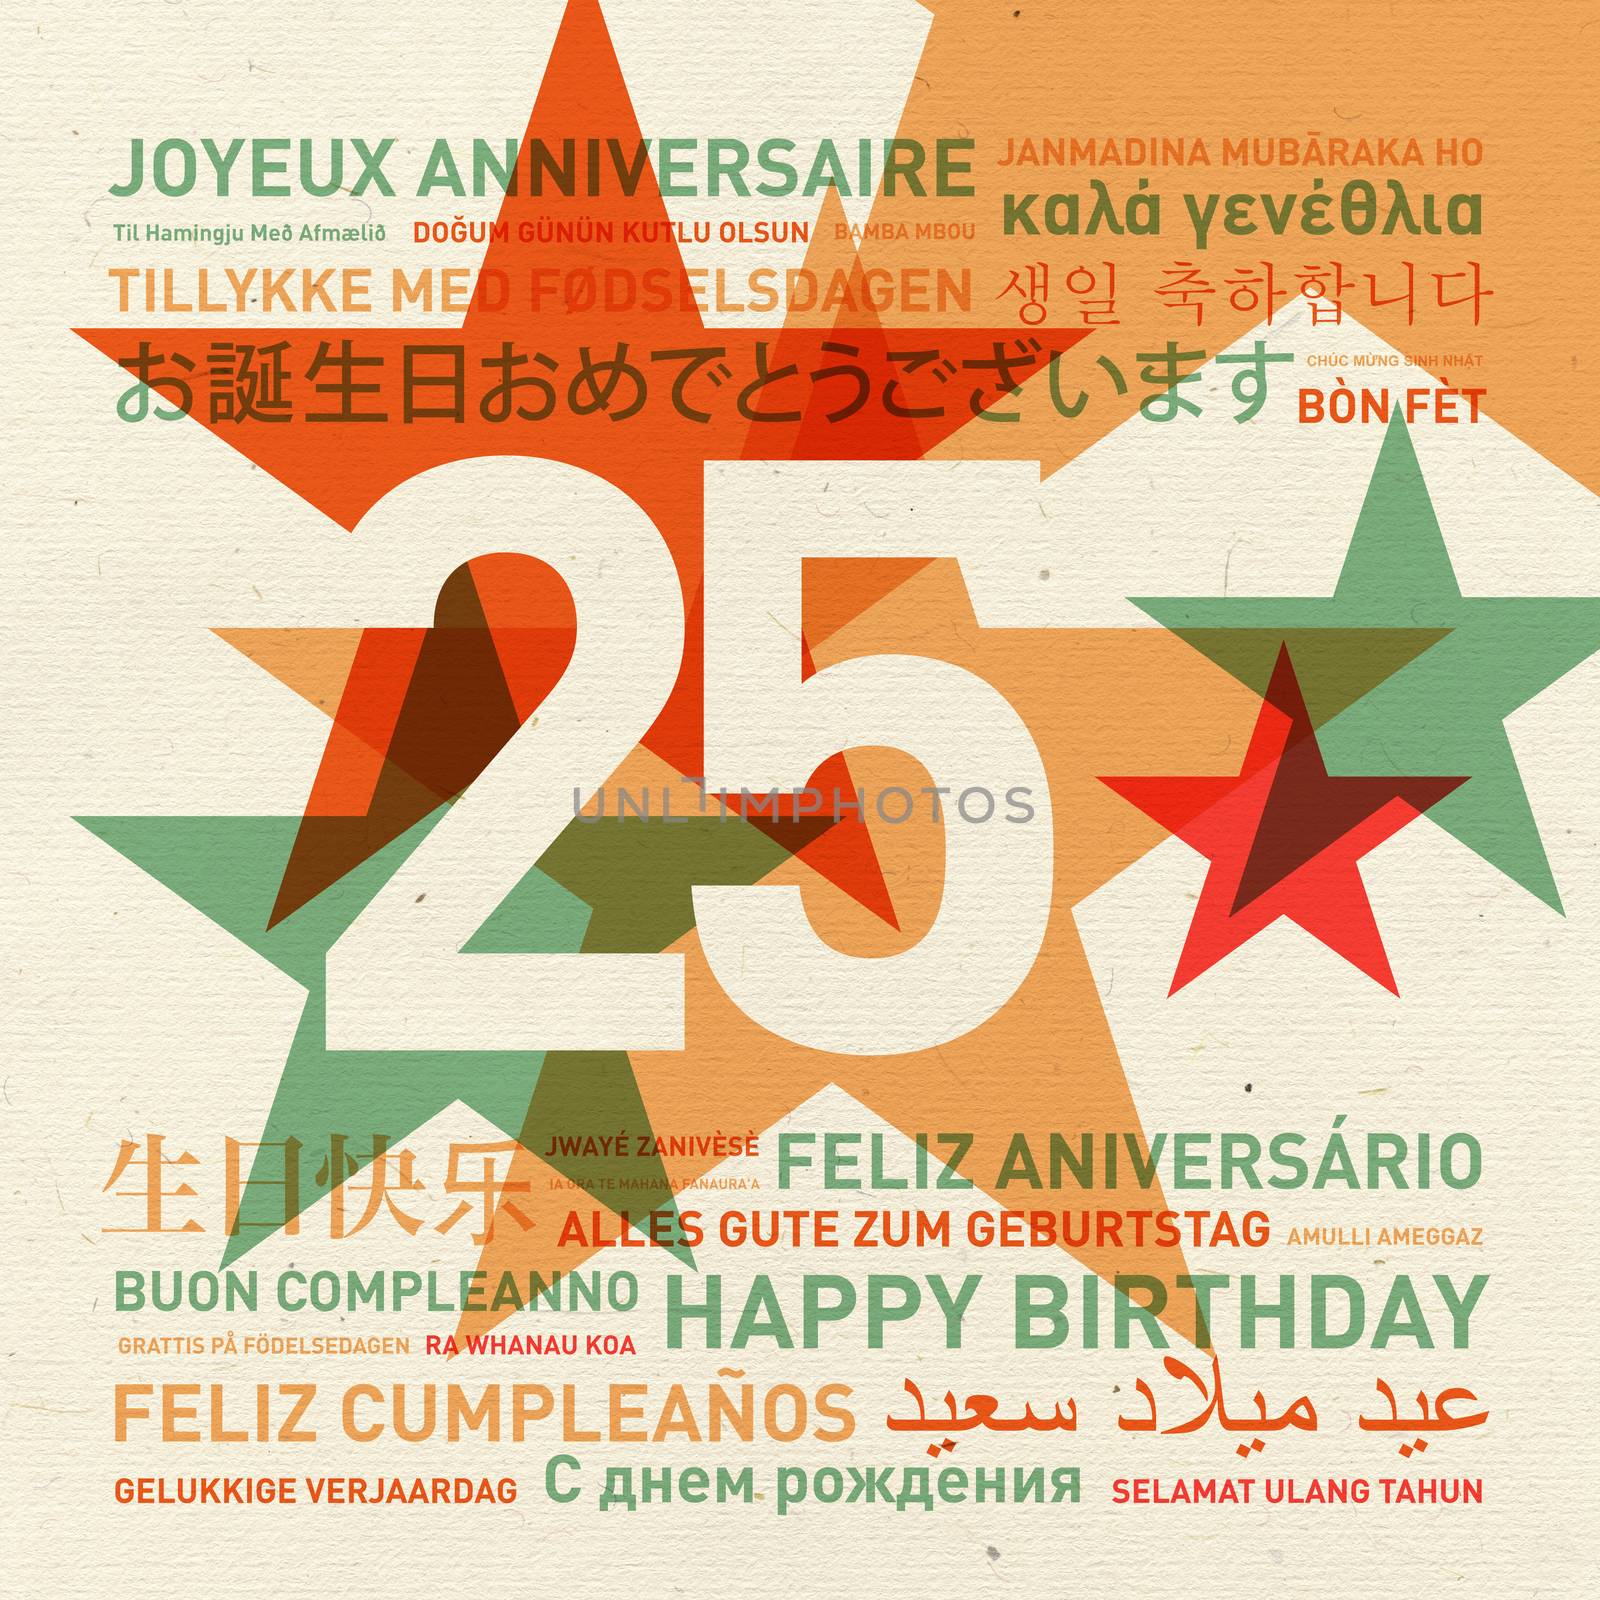 25th anniversary happy birthday from the world. Different languages celebration card